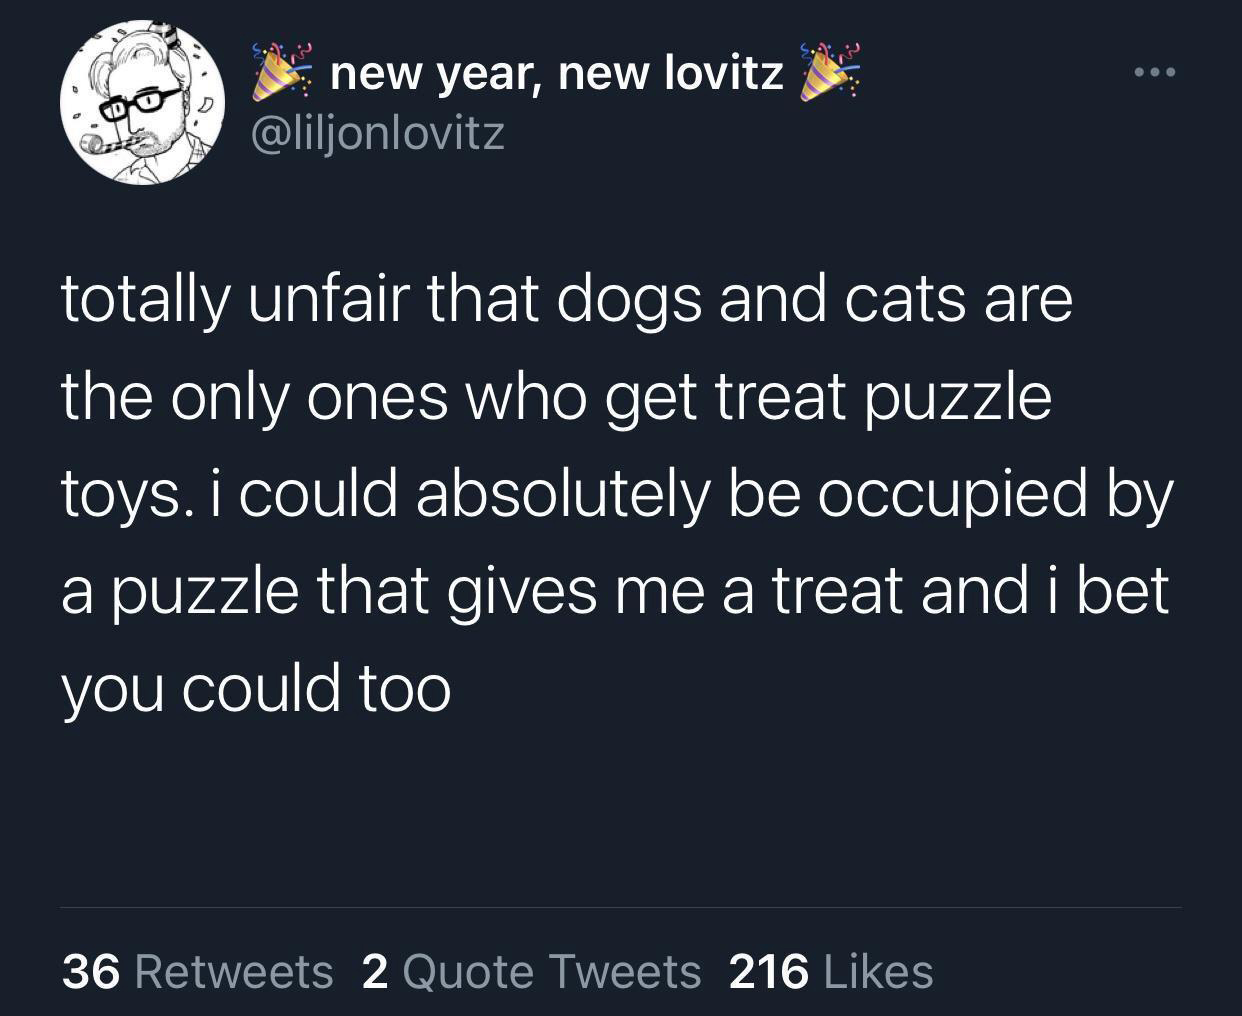 funny tweets - atmosphere - @ @ new year, new lovitz totally unfair that dogs and cats are the only ones who get treat puzzle toys. i could absolutely be occupied by a puzzle that gives me a treat and i bet you could too 36 2 Quote Tweets 216